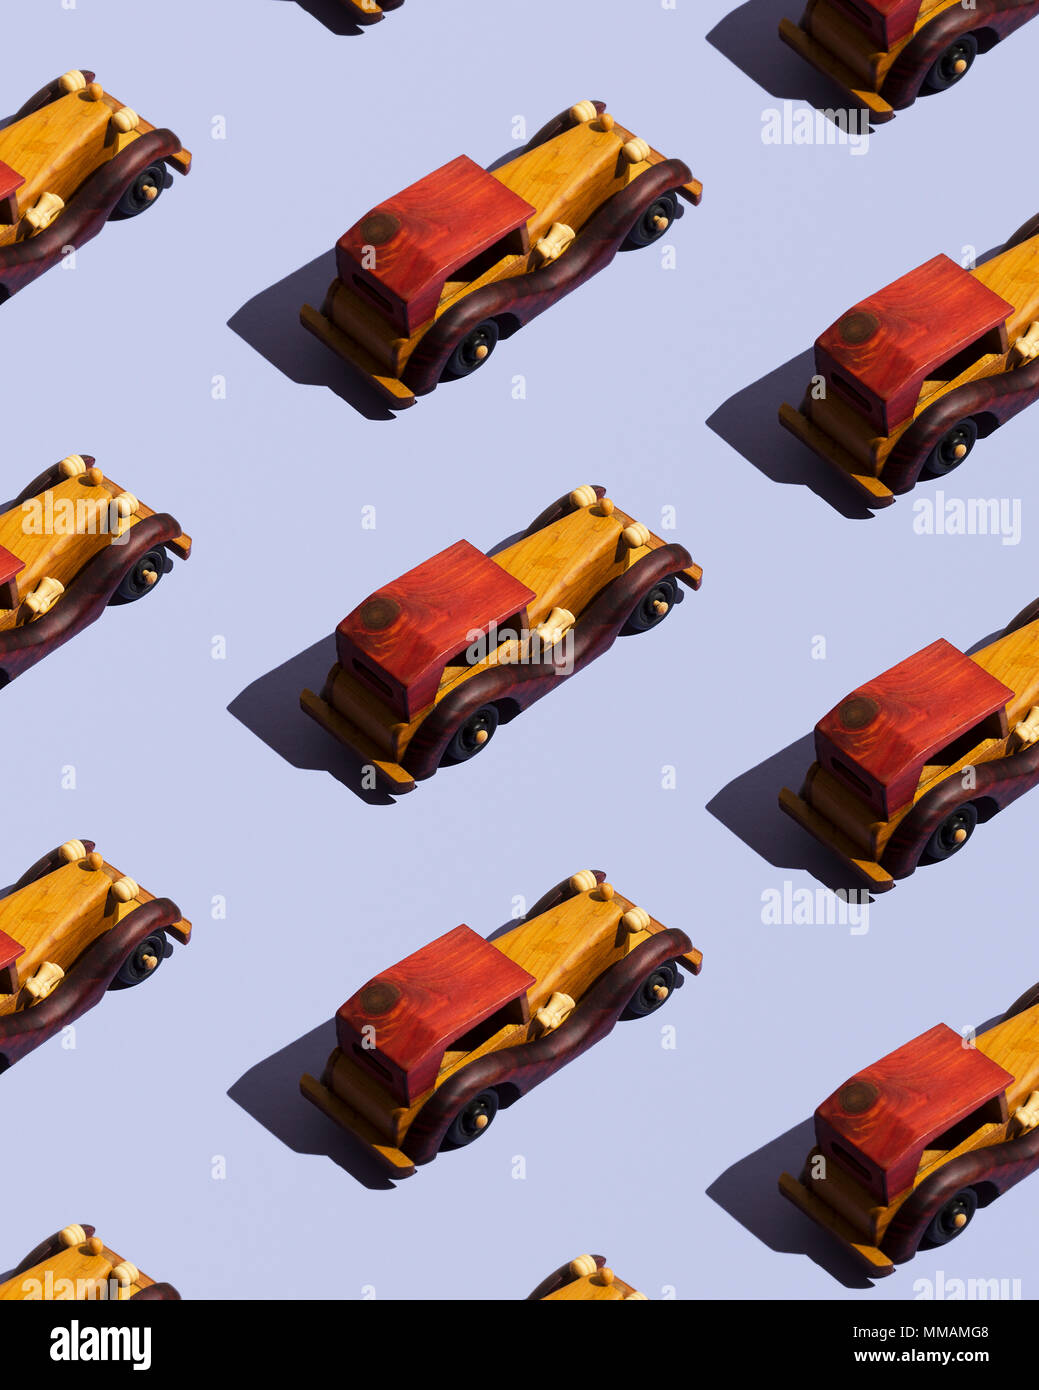 Wooden cars organized over blue background Stock Photo